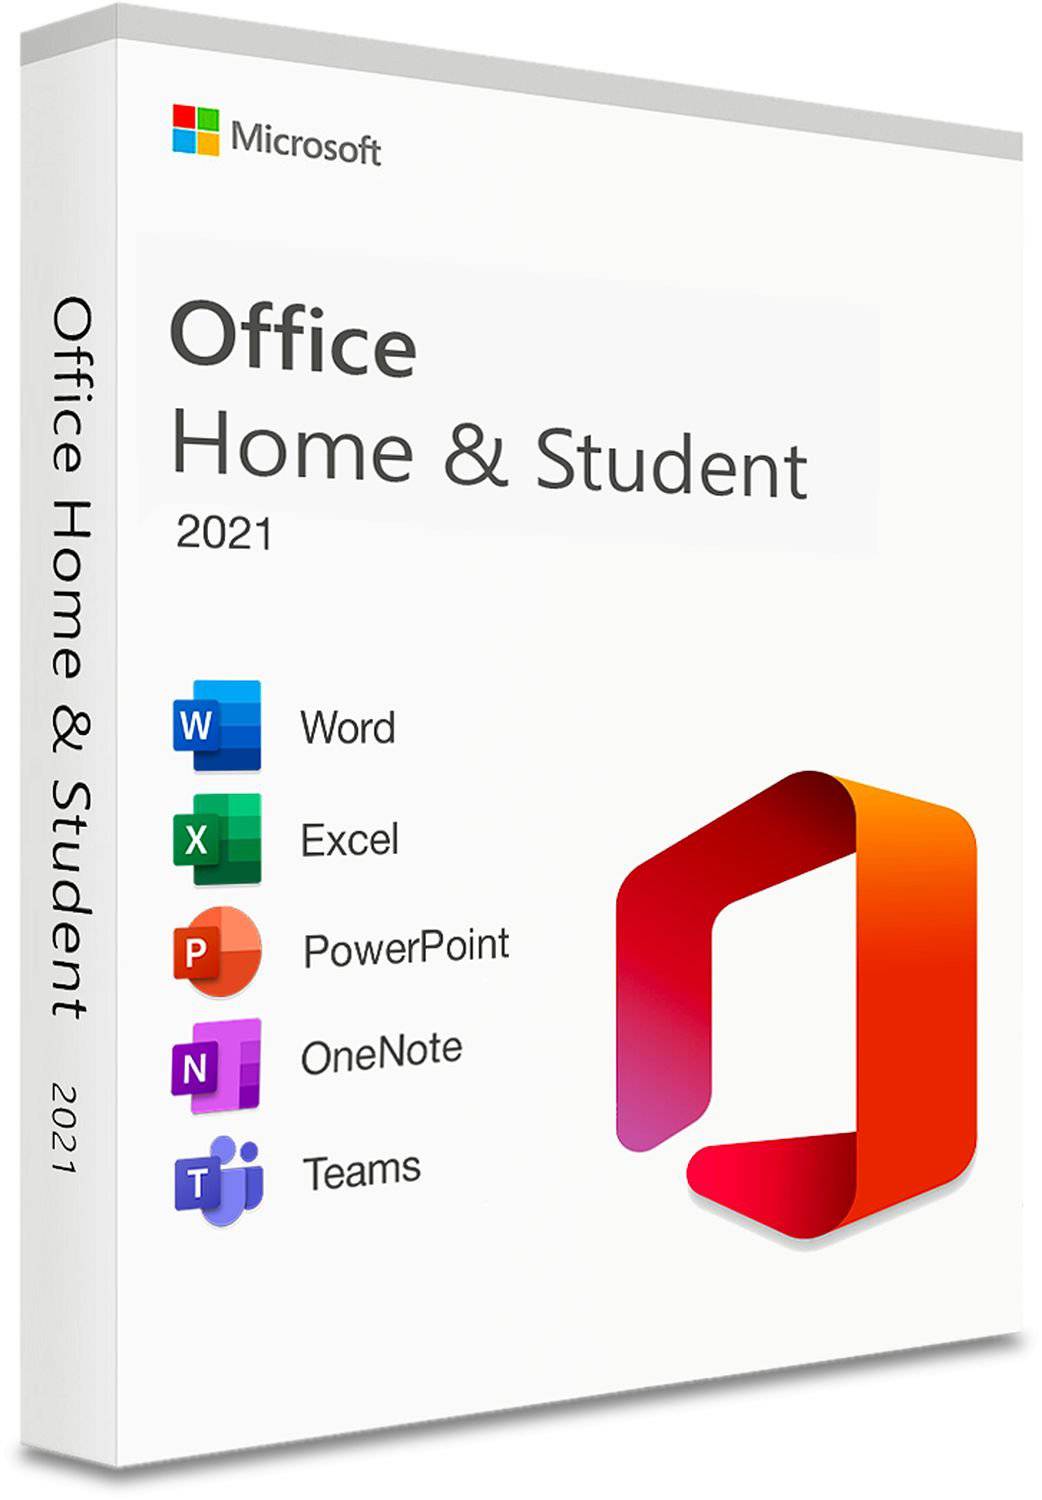 Microsoft Office 2021 Home and Student for 1 PC or MAC | Full Version | Australian Stock - INFINITE-ITECH